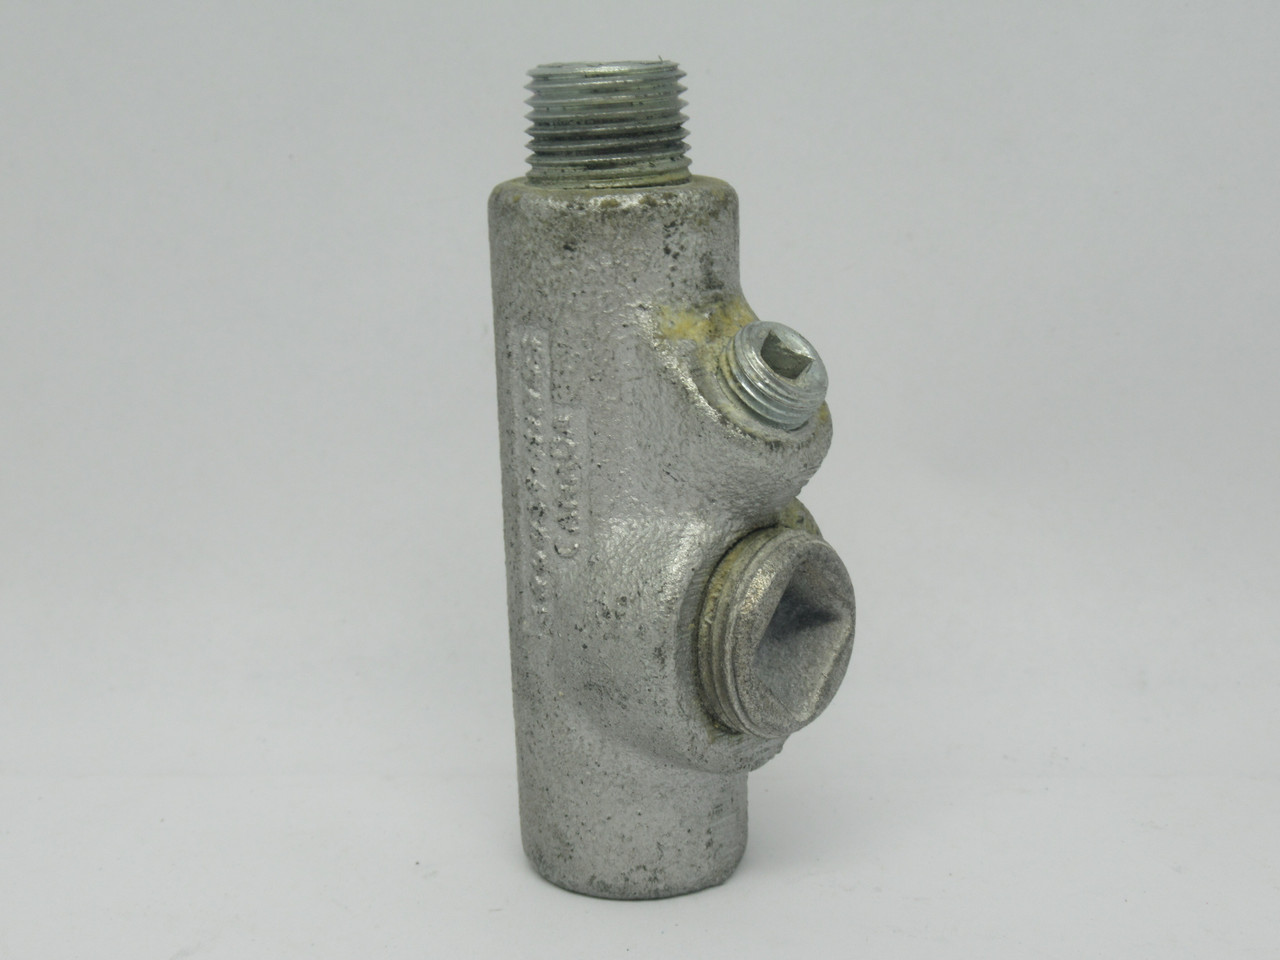 Crouse-Hinds EYS116 Conduit Sealing Fitting M/F Hub 1/2" USED